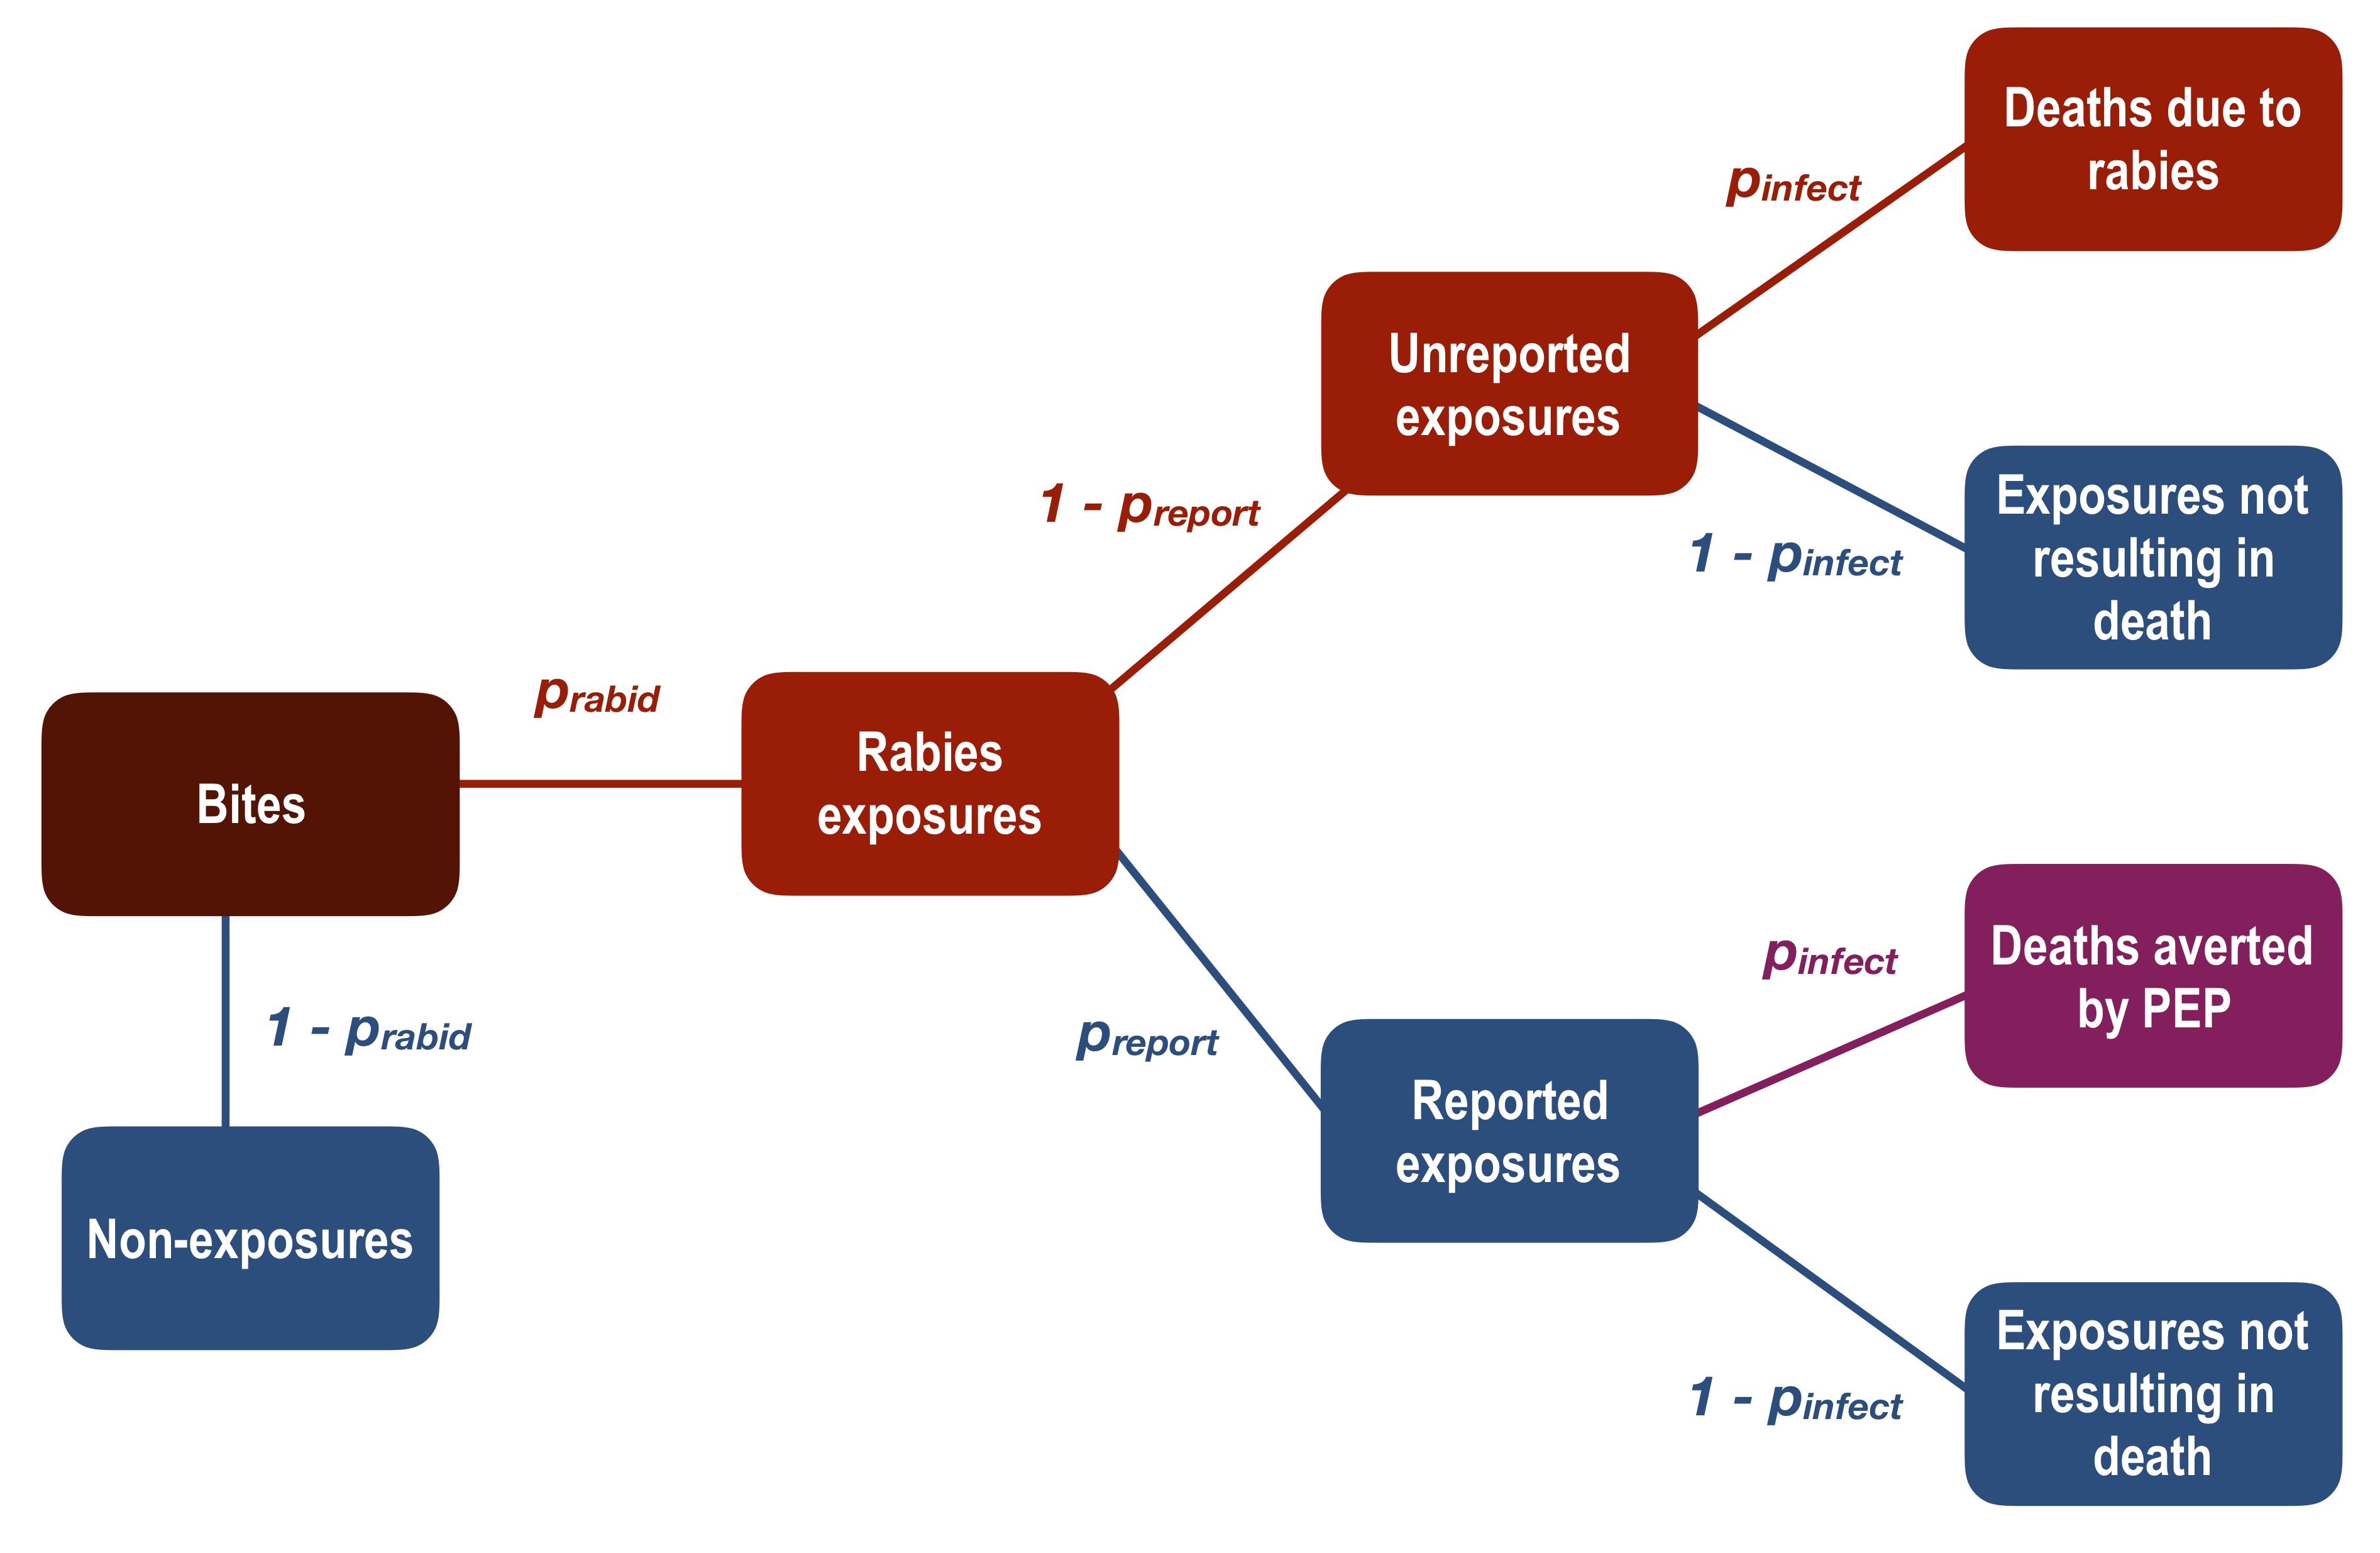 Adapted decision tree framework to estimate burden of human rabies deaths and deaths averted by PEP. We considered that some proportion of total bites in the population (expected bites annually, dark red box) are genuine rabies exposures (Bites × \(p_{rabid}\) =Rabies exposures), and non-exposures ((1 − \(p_{rabid}\)) × Bites) do not contribute to rabies deaths or averted deaths. Of the genuine rabies exposures, a fraction present to an ARMC and all of these persons receive PEP (Rabies exposures × \(p_{report}\) = Reported exposures). Some of these exposed persons would otherwise have become infected and died if they had not received PEP (Reported exposures × \(p_{infect}\) = Deaths averted by PEP). Of the unreported exposures, a proportion will die due to rabies infection (Unreported exposures × \(p_{infect}\) = Deaths due to rabies).